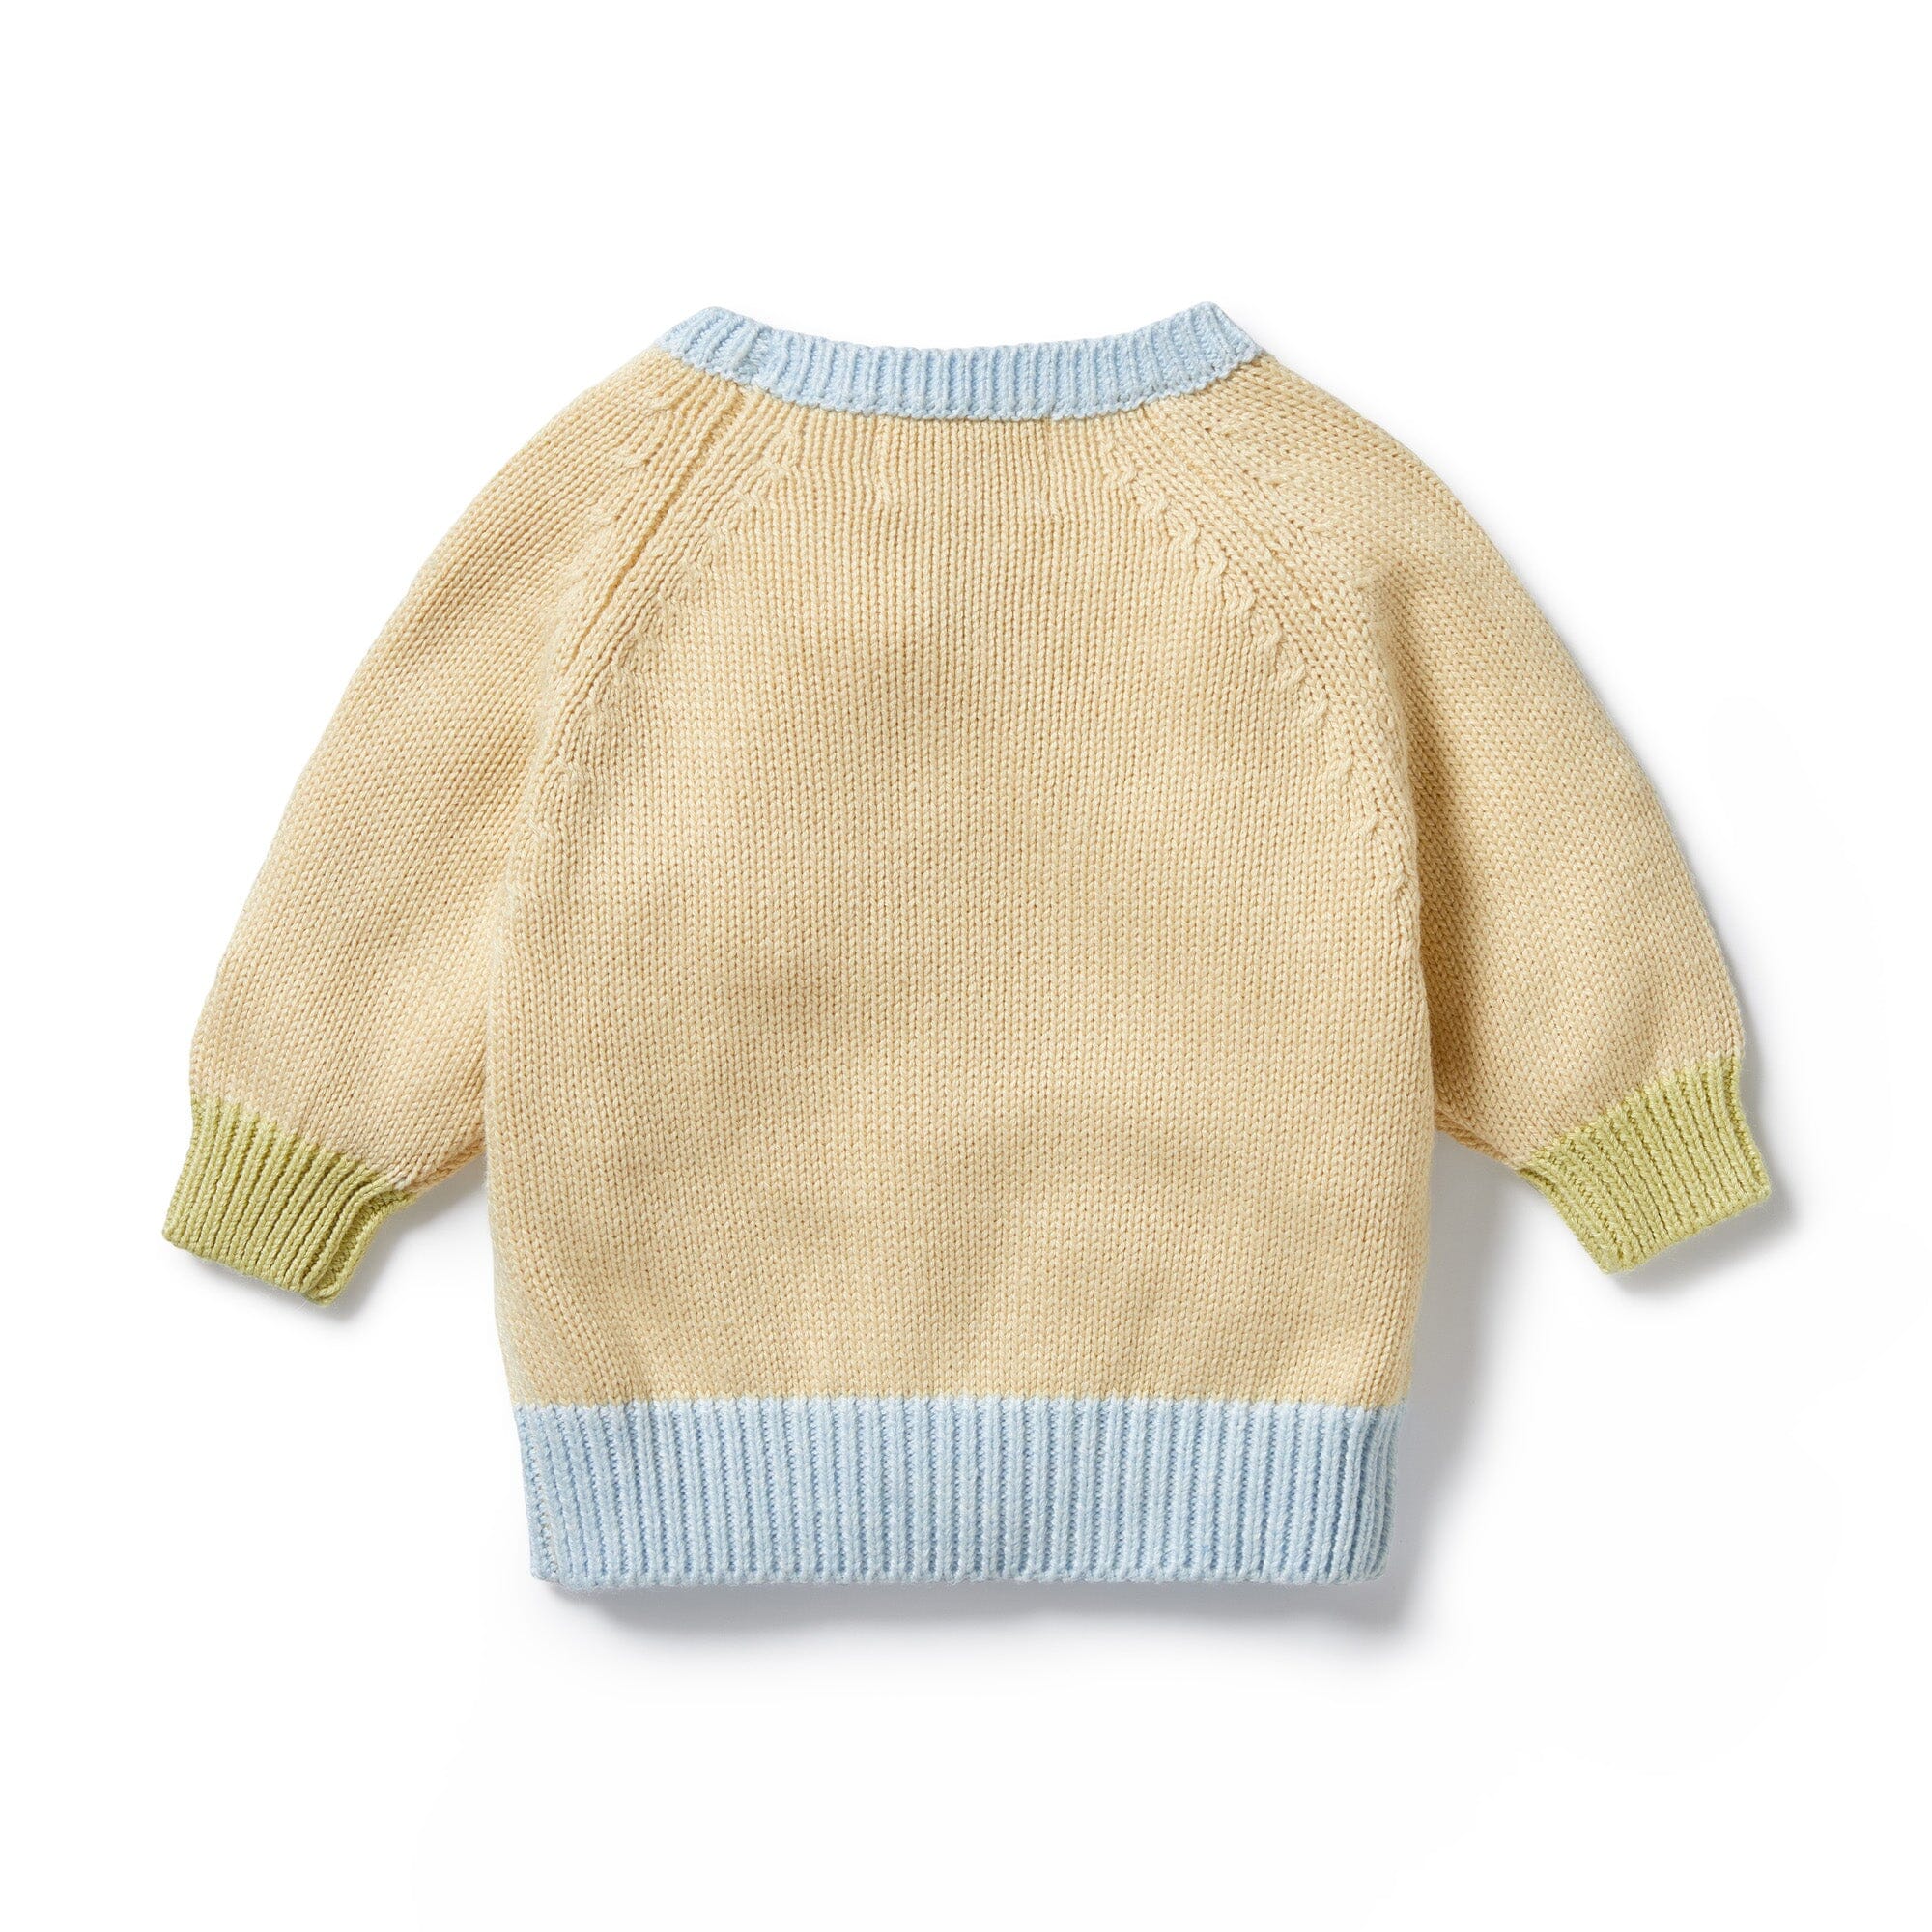 Wilson & Frenchy - Knitted Jacquard Jumper - Dew Baby Wilson & Frenchy